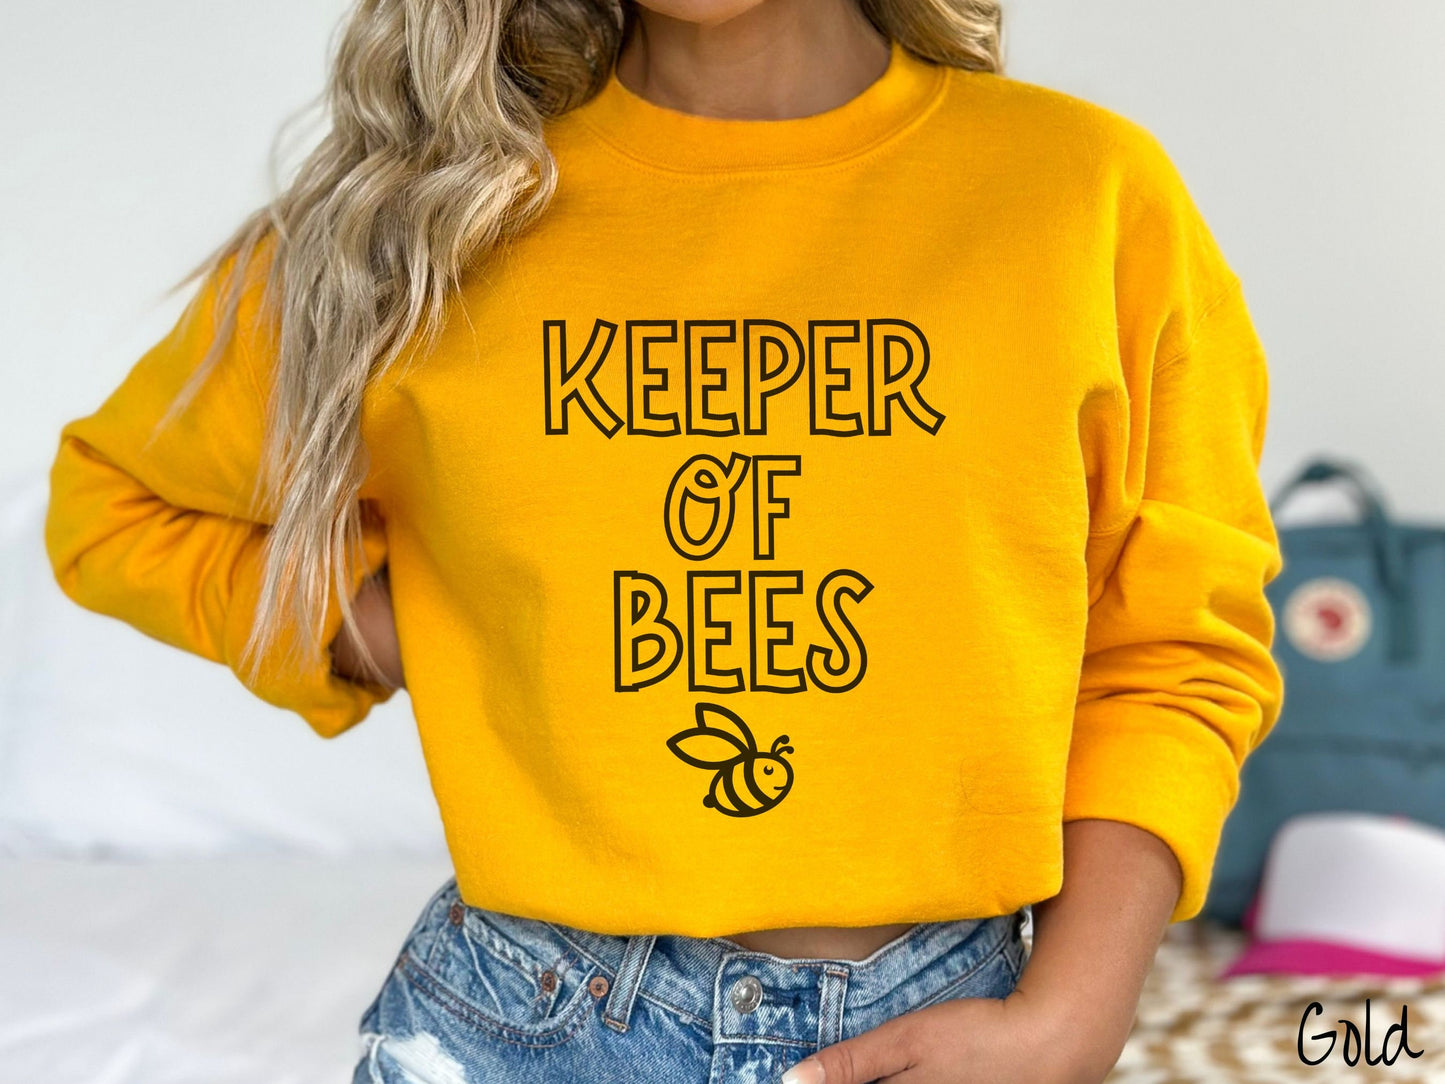 The Keeper of Bees Sweatshirt, Gift this Beekeeping Sweater to the Beekeeper in your Life!